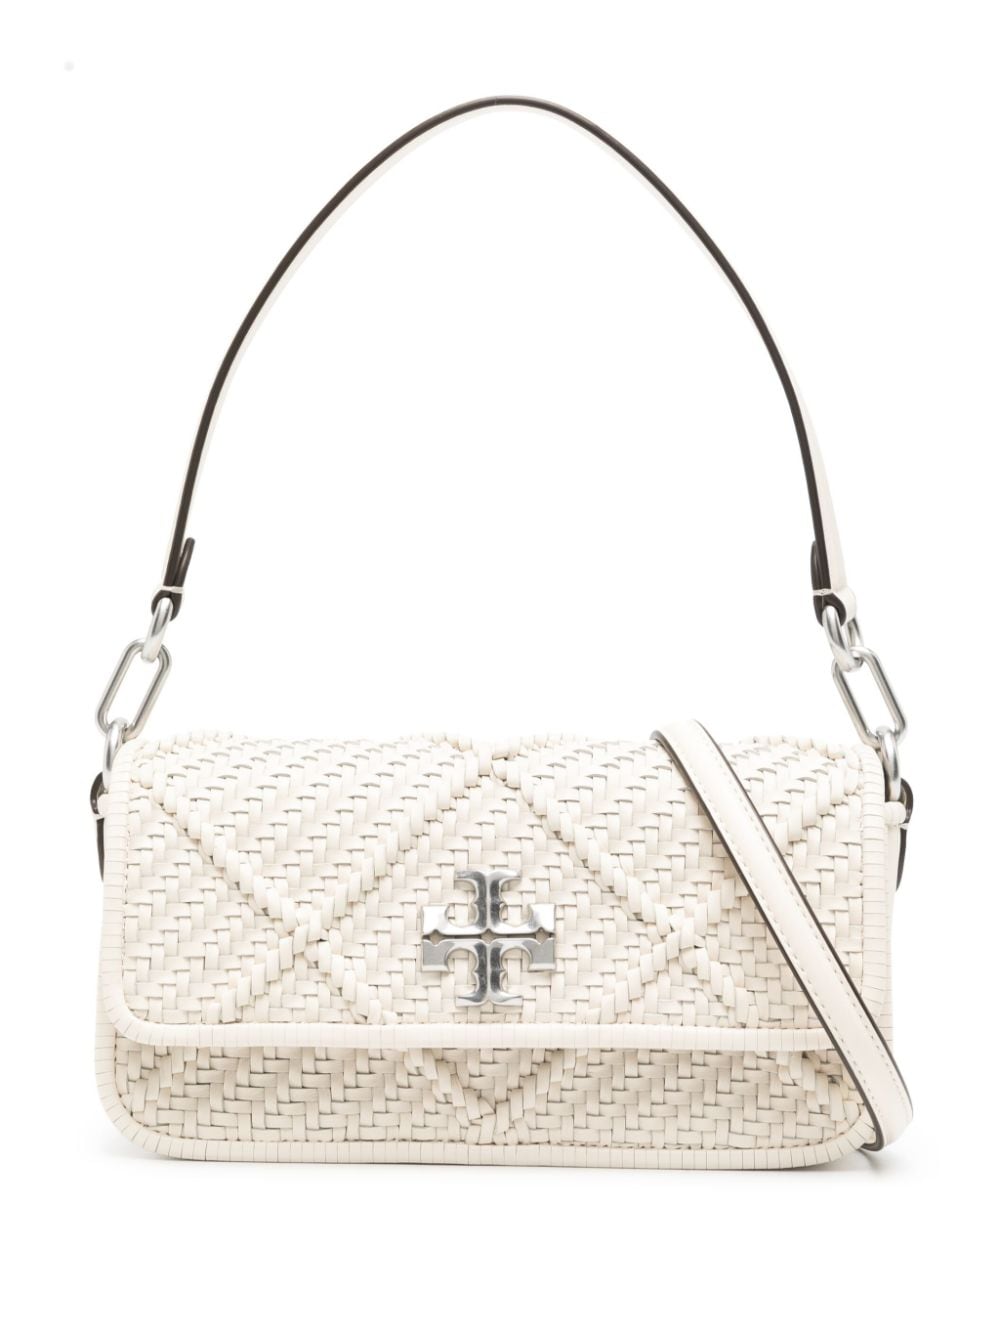 This Small Kira Shoulder Bag From Tory Burch is Perfect for Her